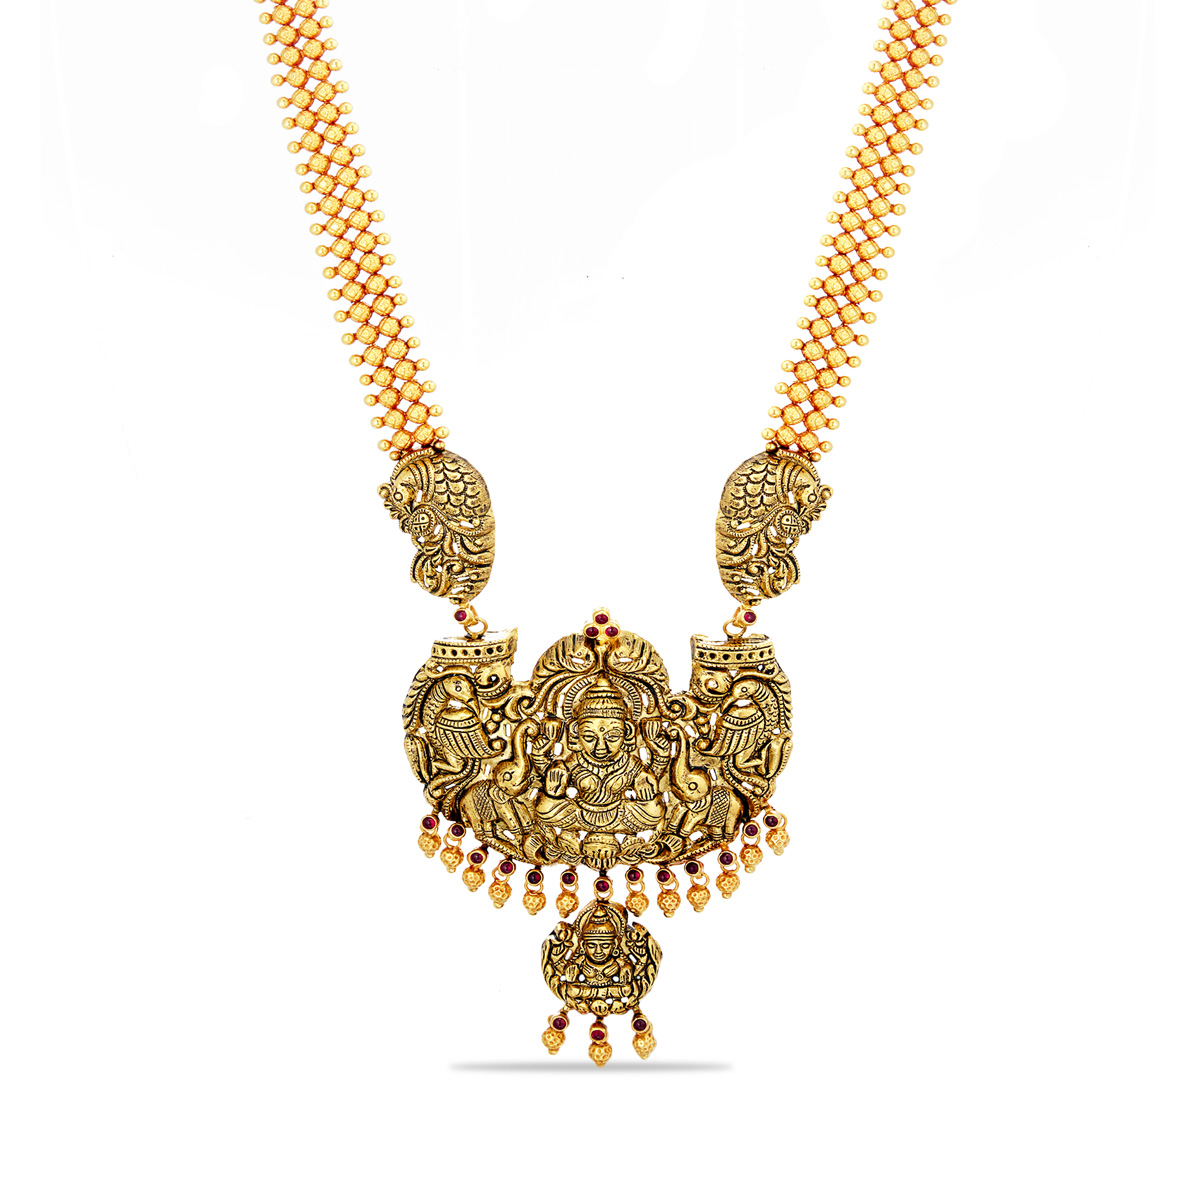 Antique and Traditional Jewellery